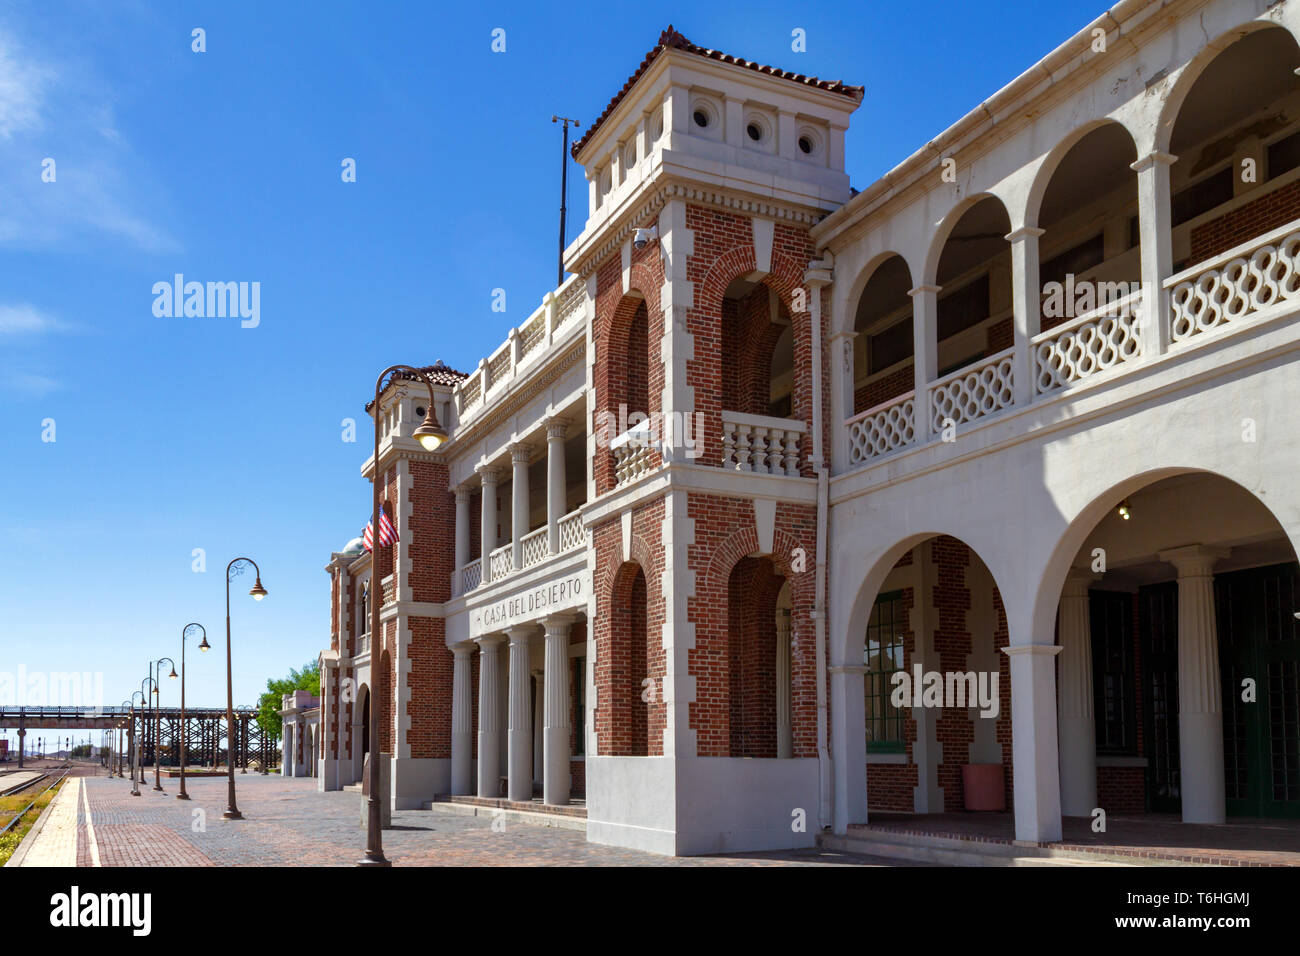 Barstow, CA / USA – April 14, 2019: Casa Del Desierto, also known as the Barstow Harvey House, is a historical landmark located at 685 North 1st Avenu Stock Photo